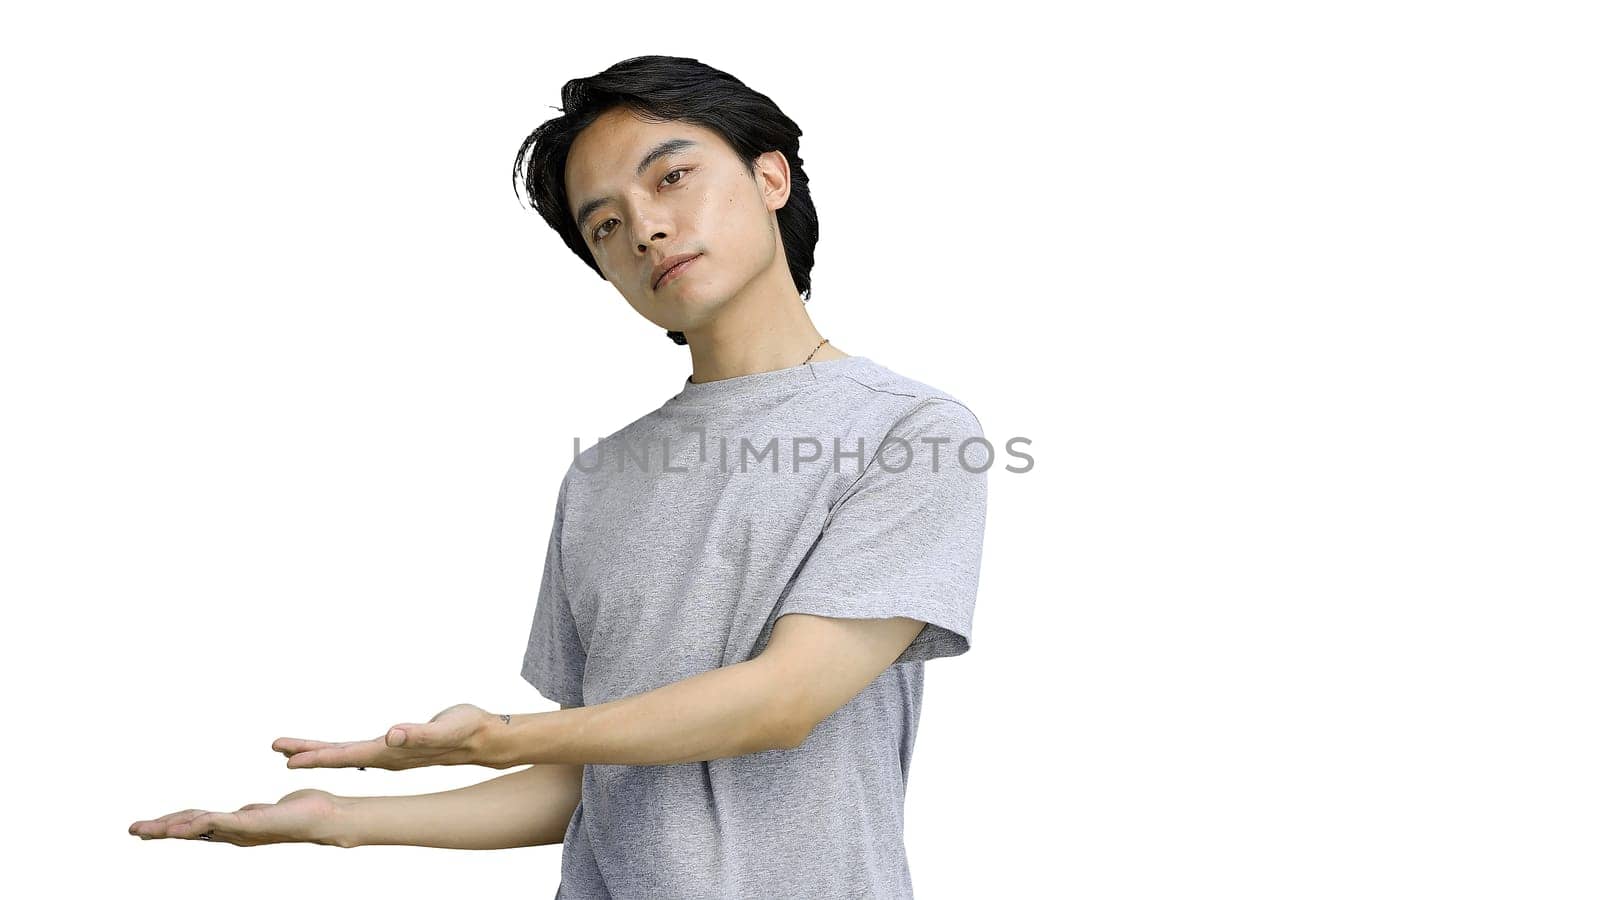 A guy in a gray T-shirt, on a white background, close-up, pointing side.